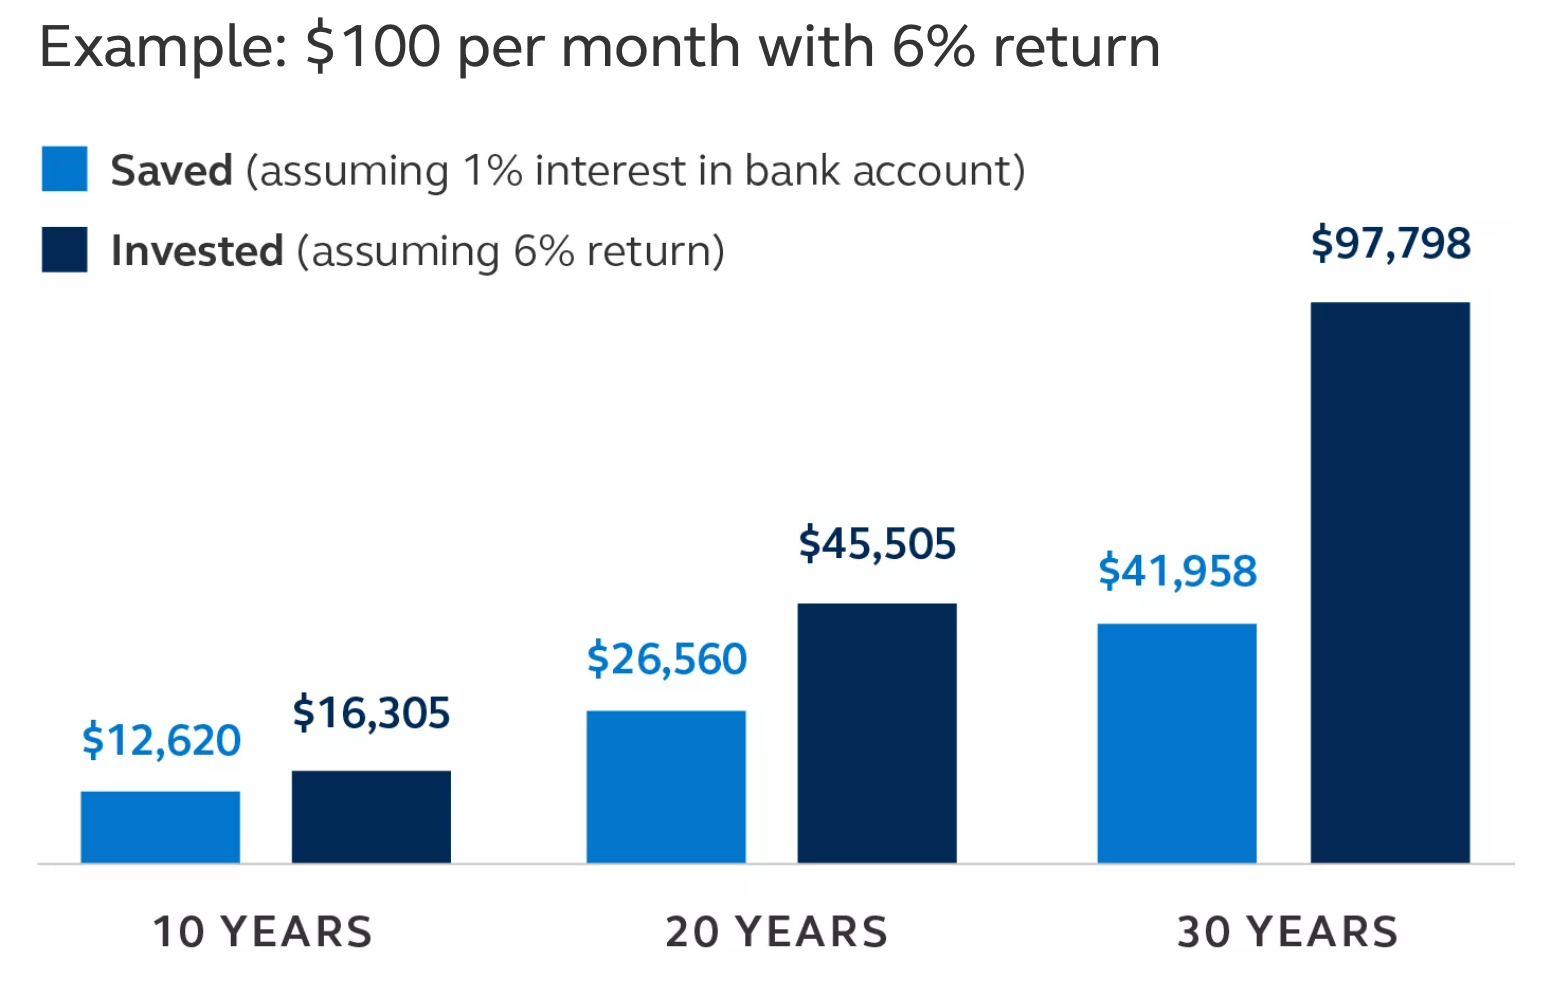 Chart showing $100 per month in savings vs. invested with a 6% return over 10, 20, and 30 years